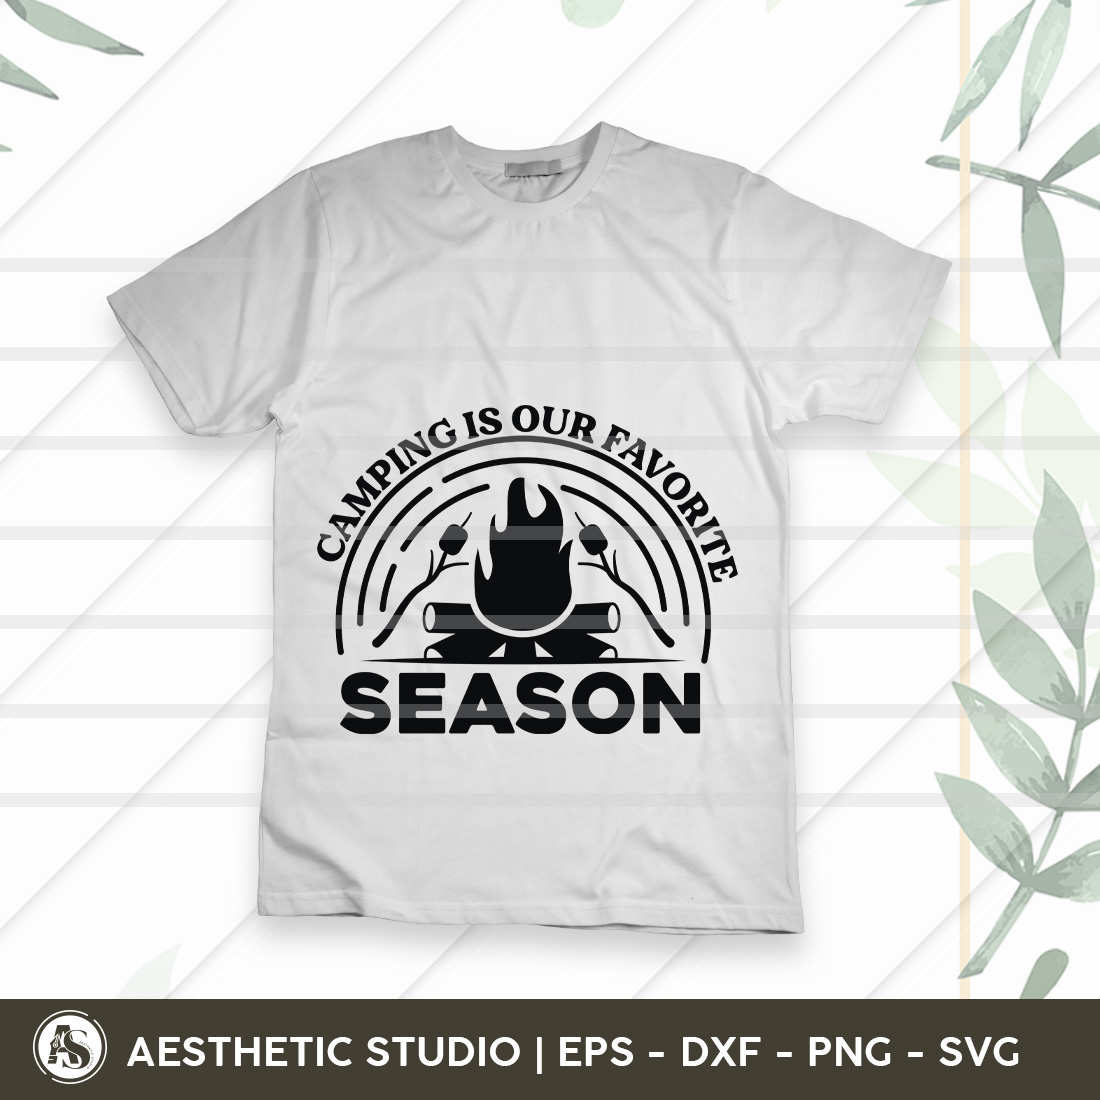 Camping Is Our Favorite Season, Adventure, Camp Life, Camping Svg, Typography, Camping Quotes, Camping Cut File, Funny Camping, Camping T-shirt Design, Svg, Eps, Dxf, Png, Cut file preview image.